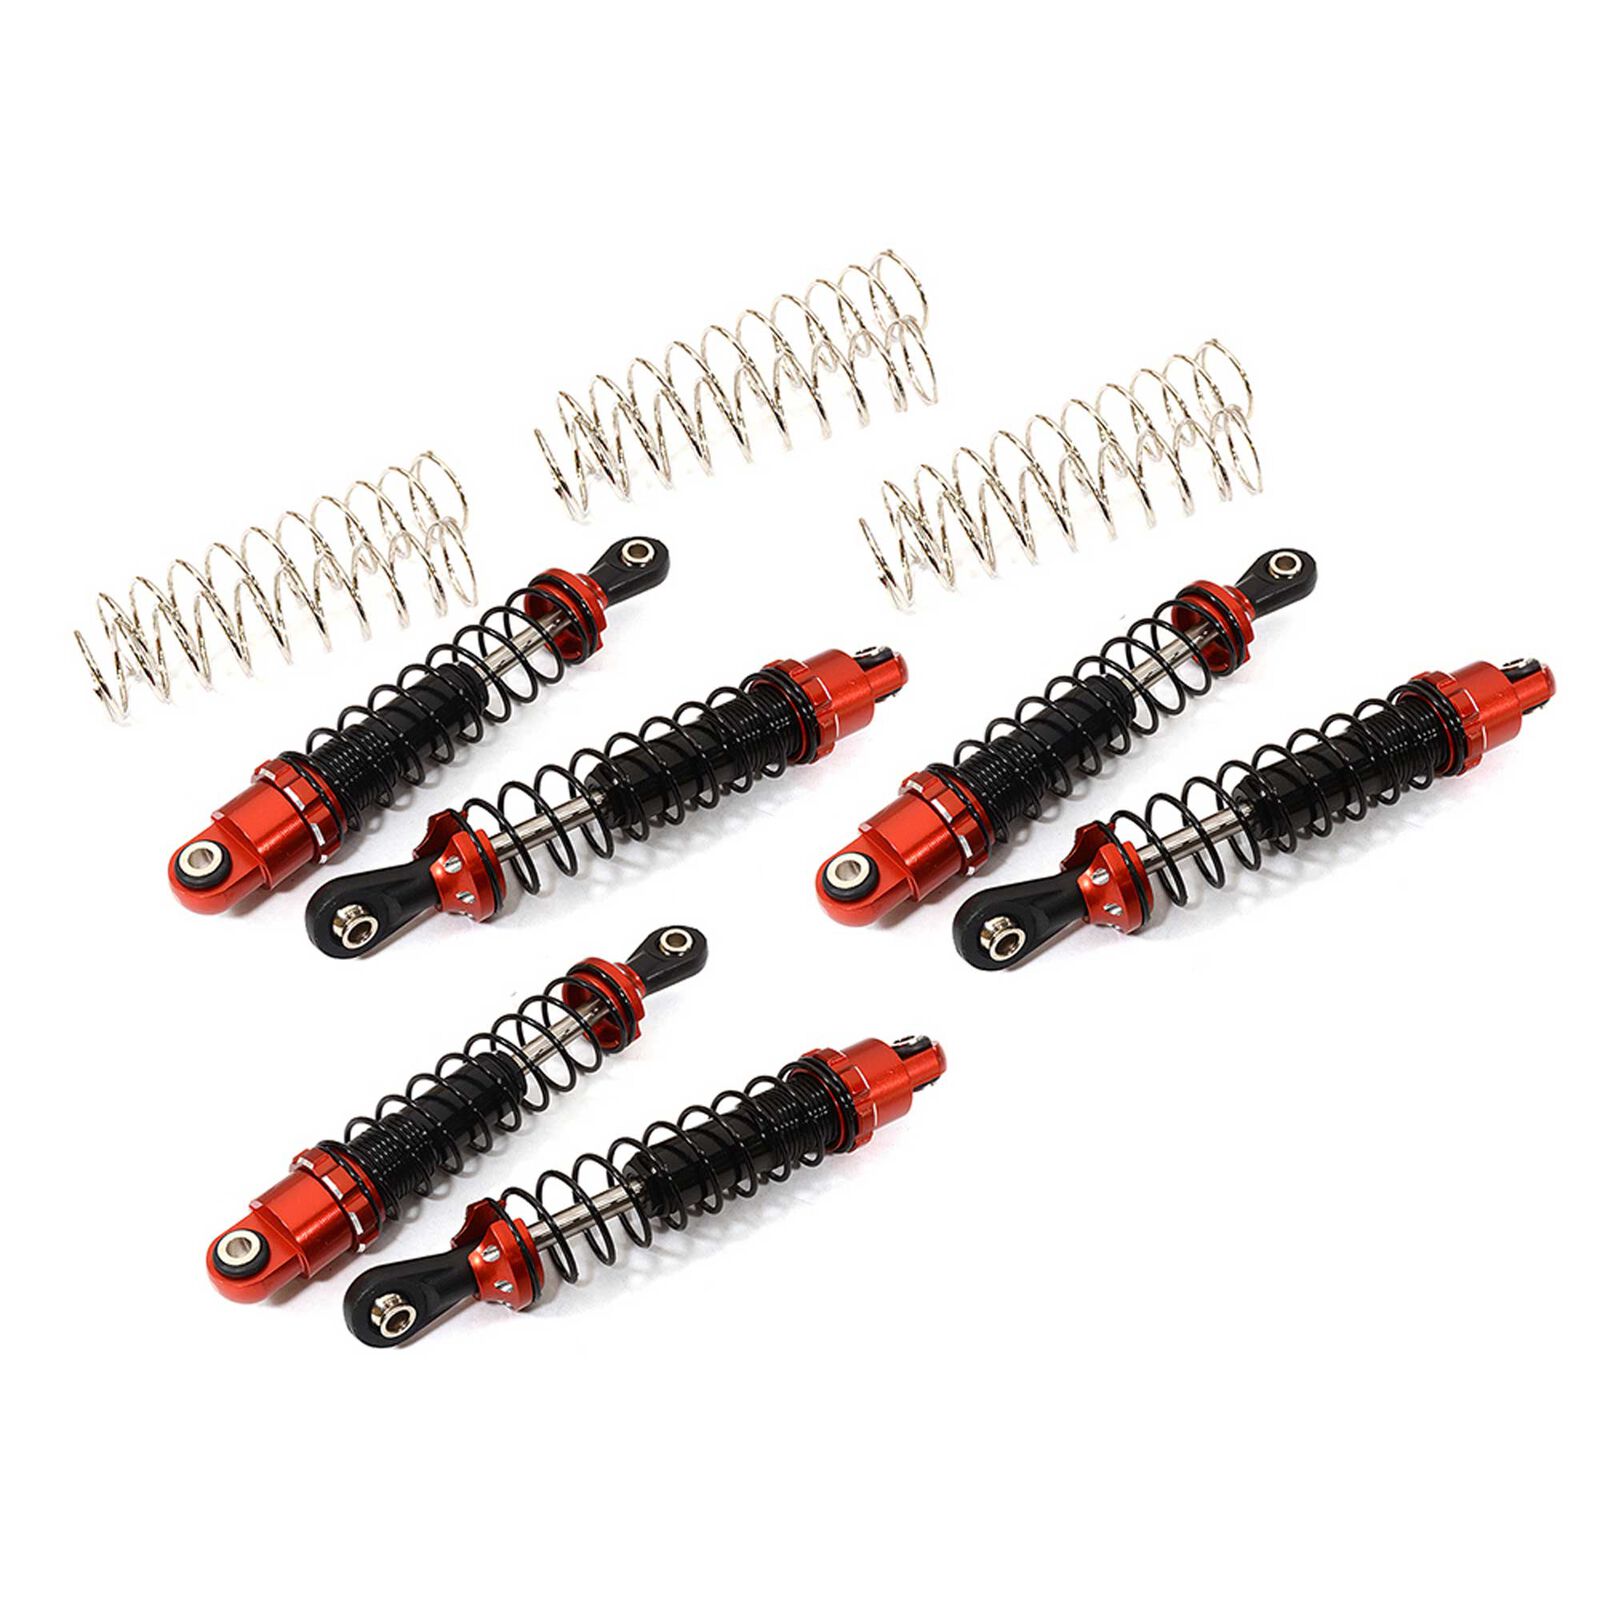 Shock Set for Axial SCX10 II 6X6 90mm, Red (6)